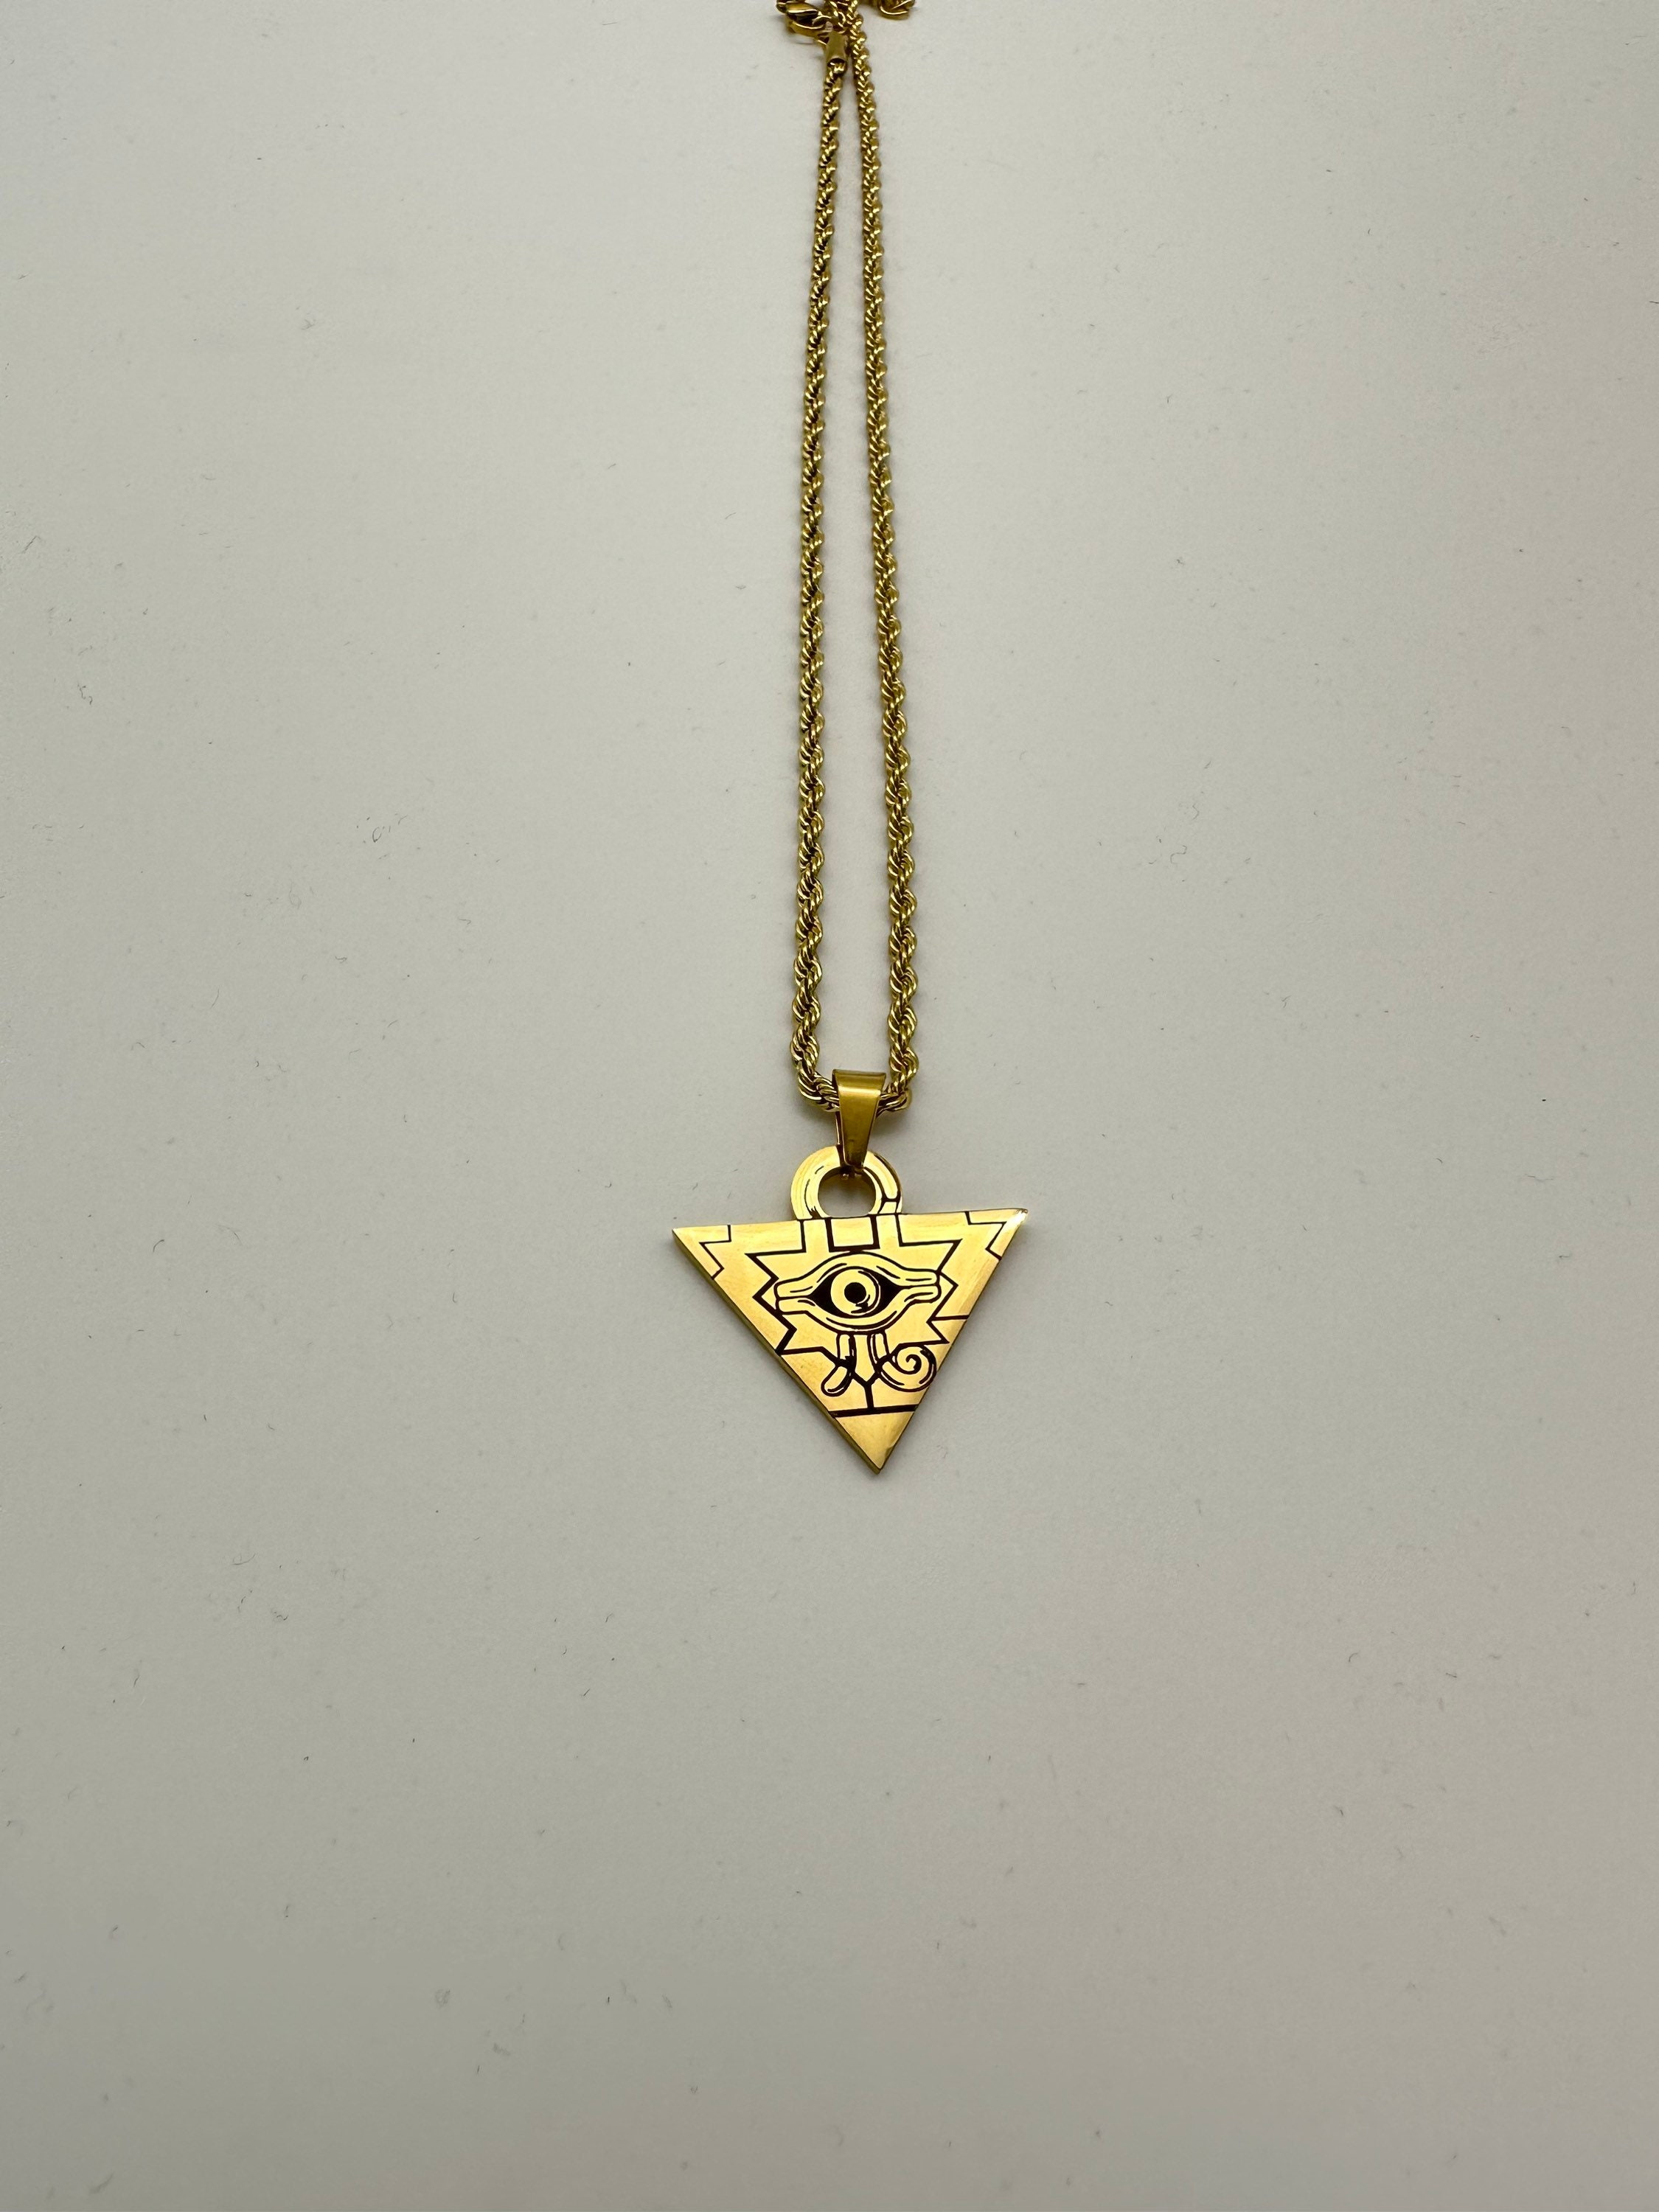 FVCK Pyramid Necklace, Green Sapphire. – Gift Horse Gems